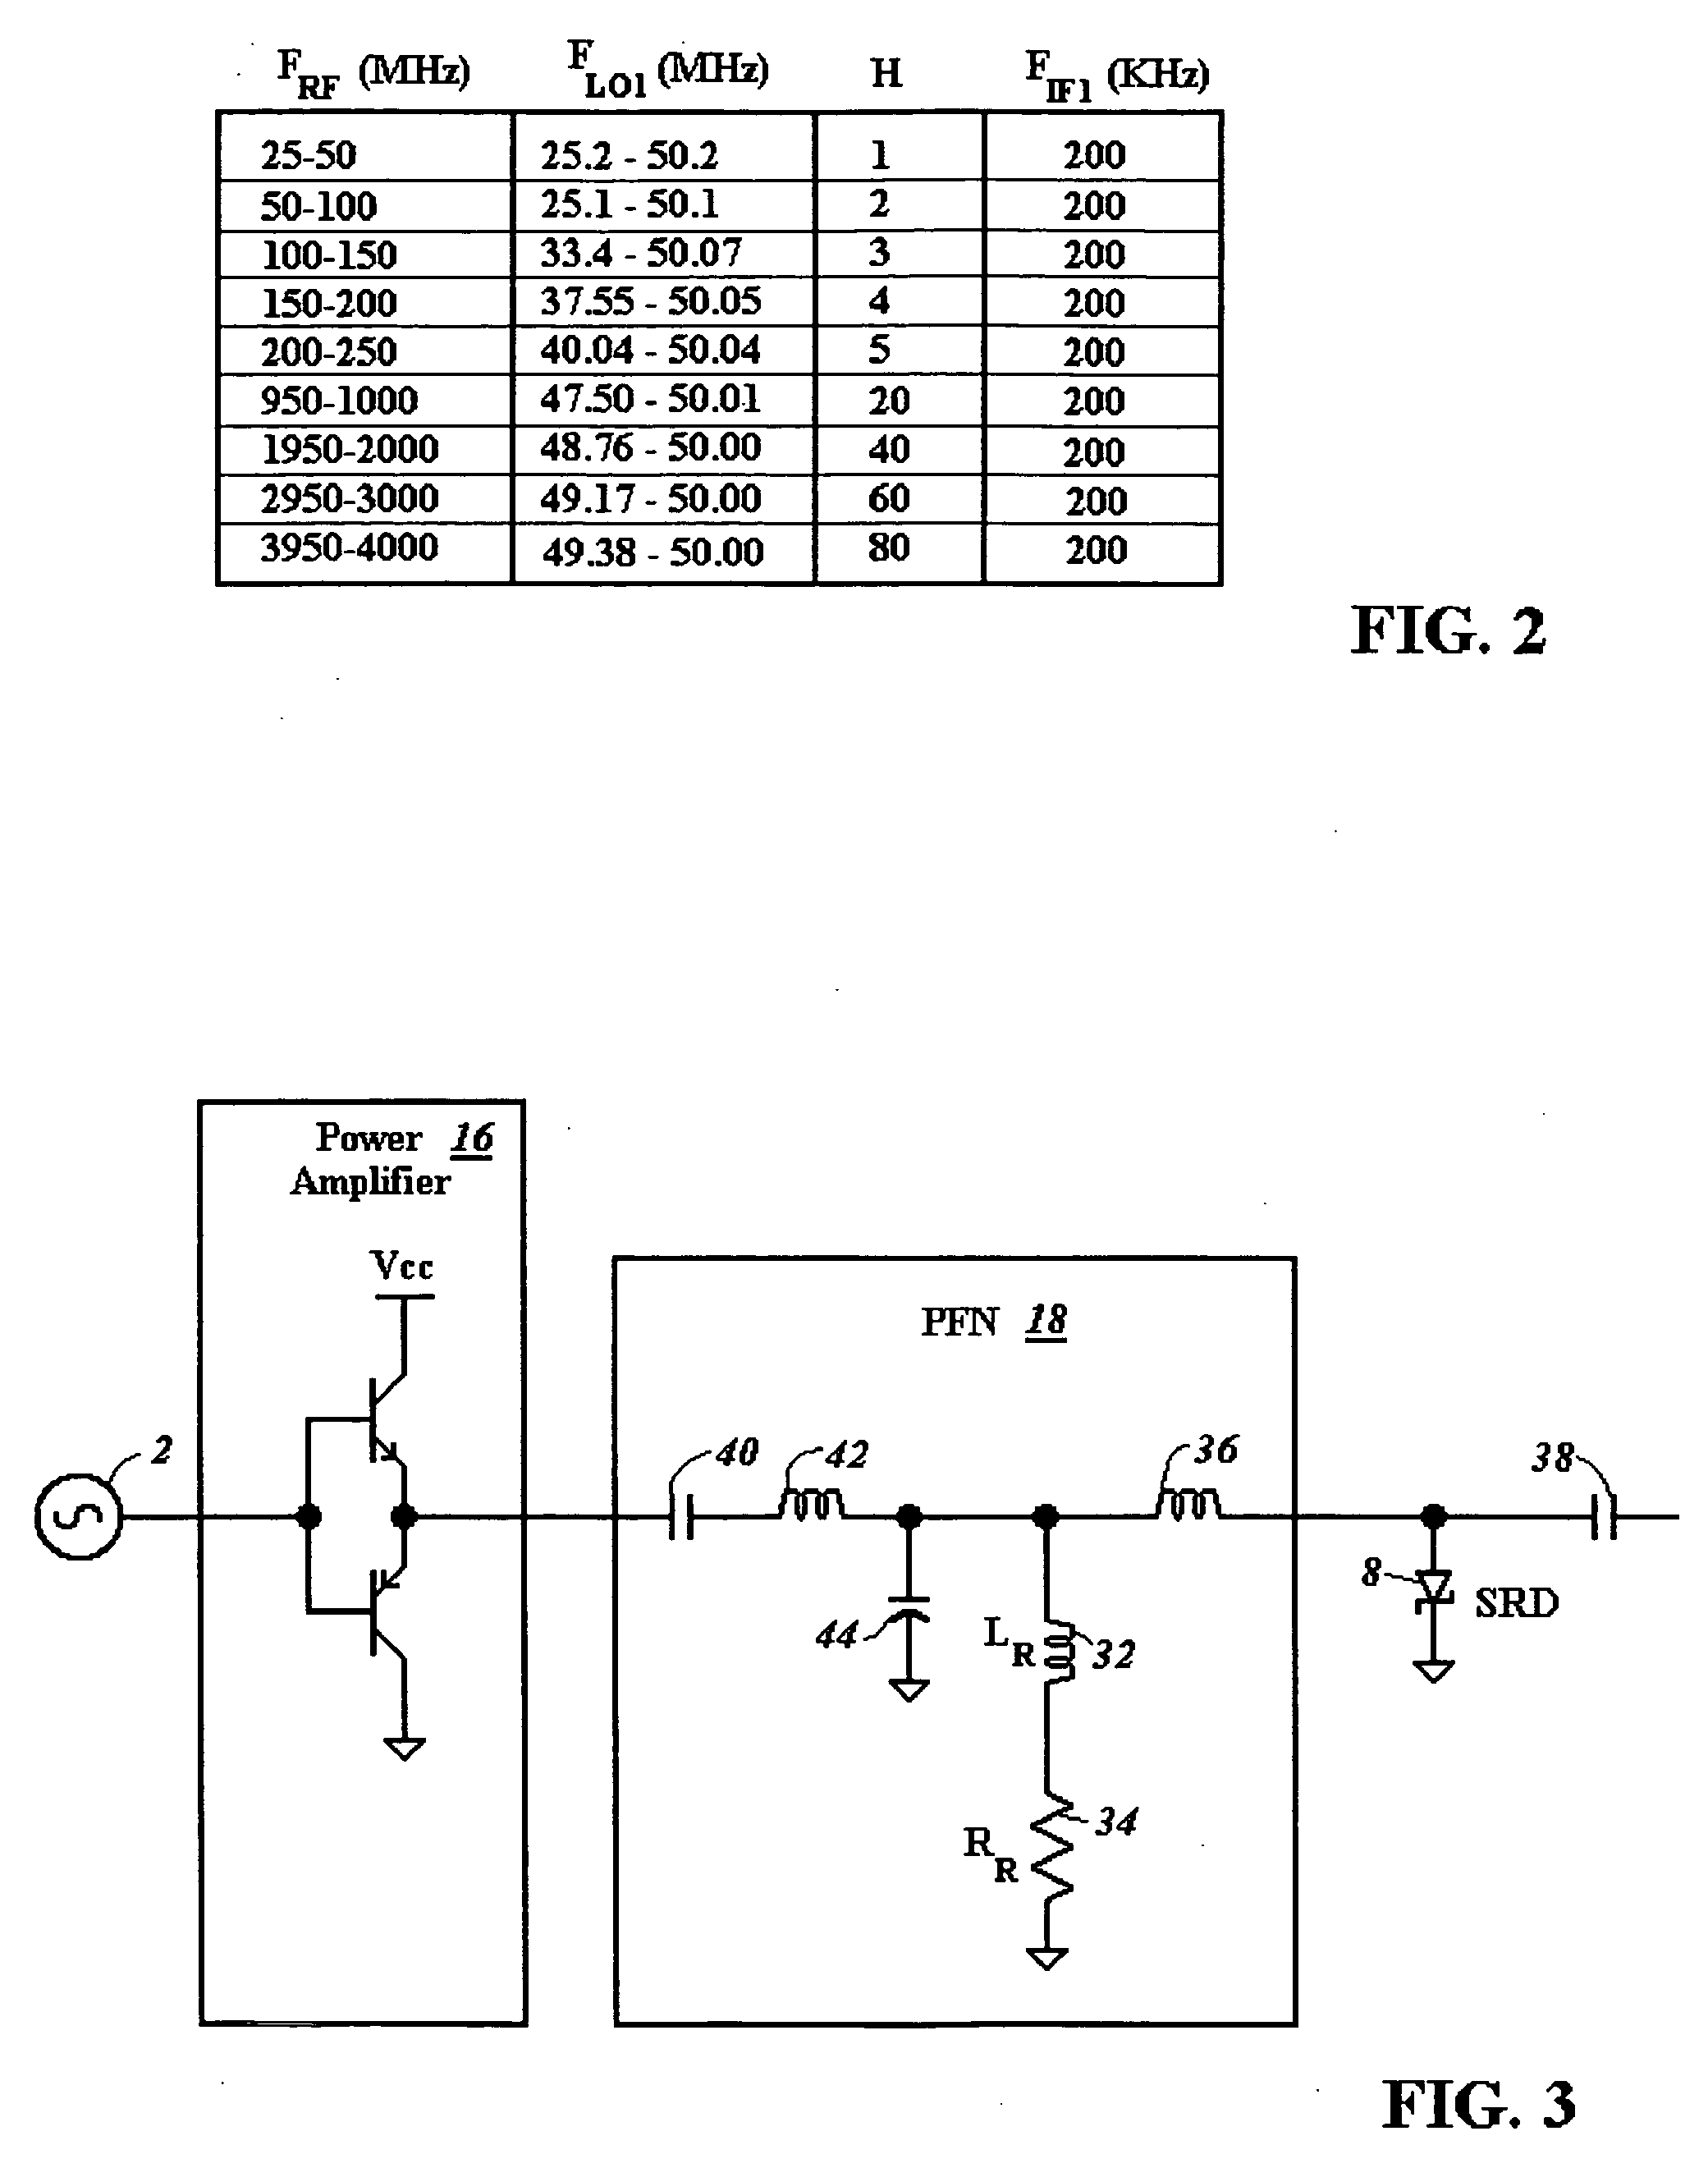 Method and apparatus for extending the lower frequency operation of a sampler based VNA